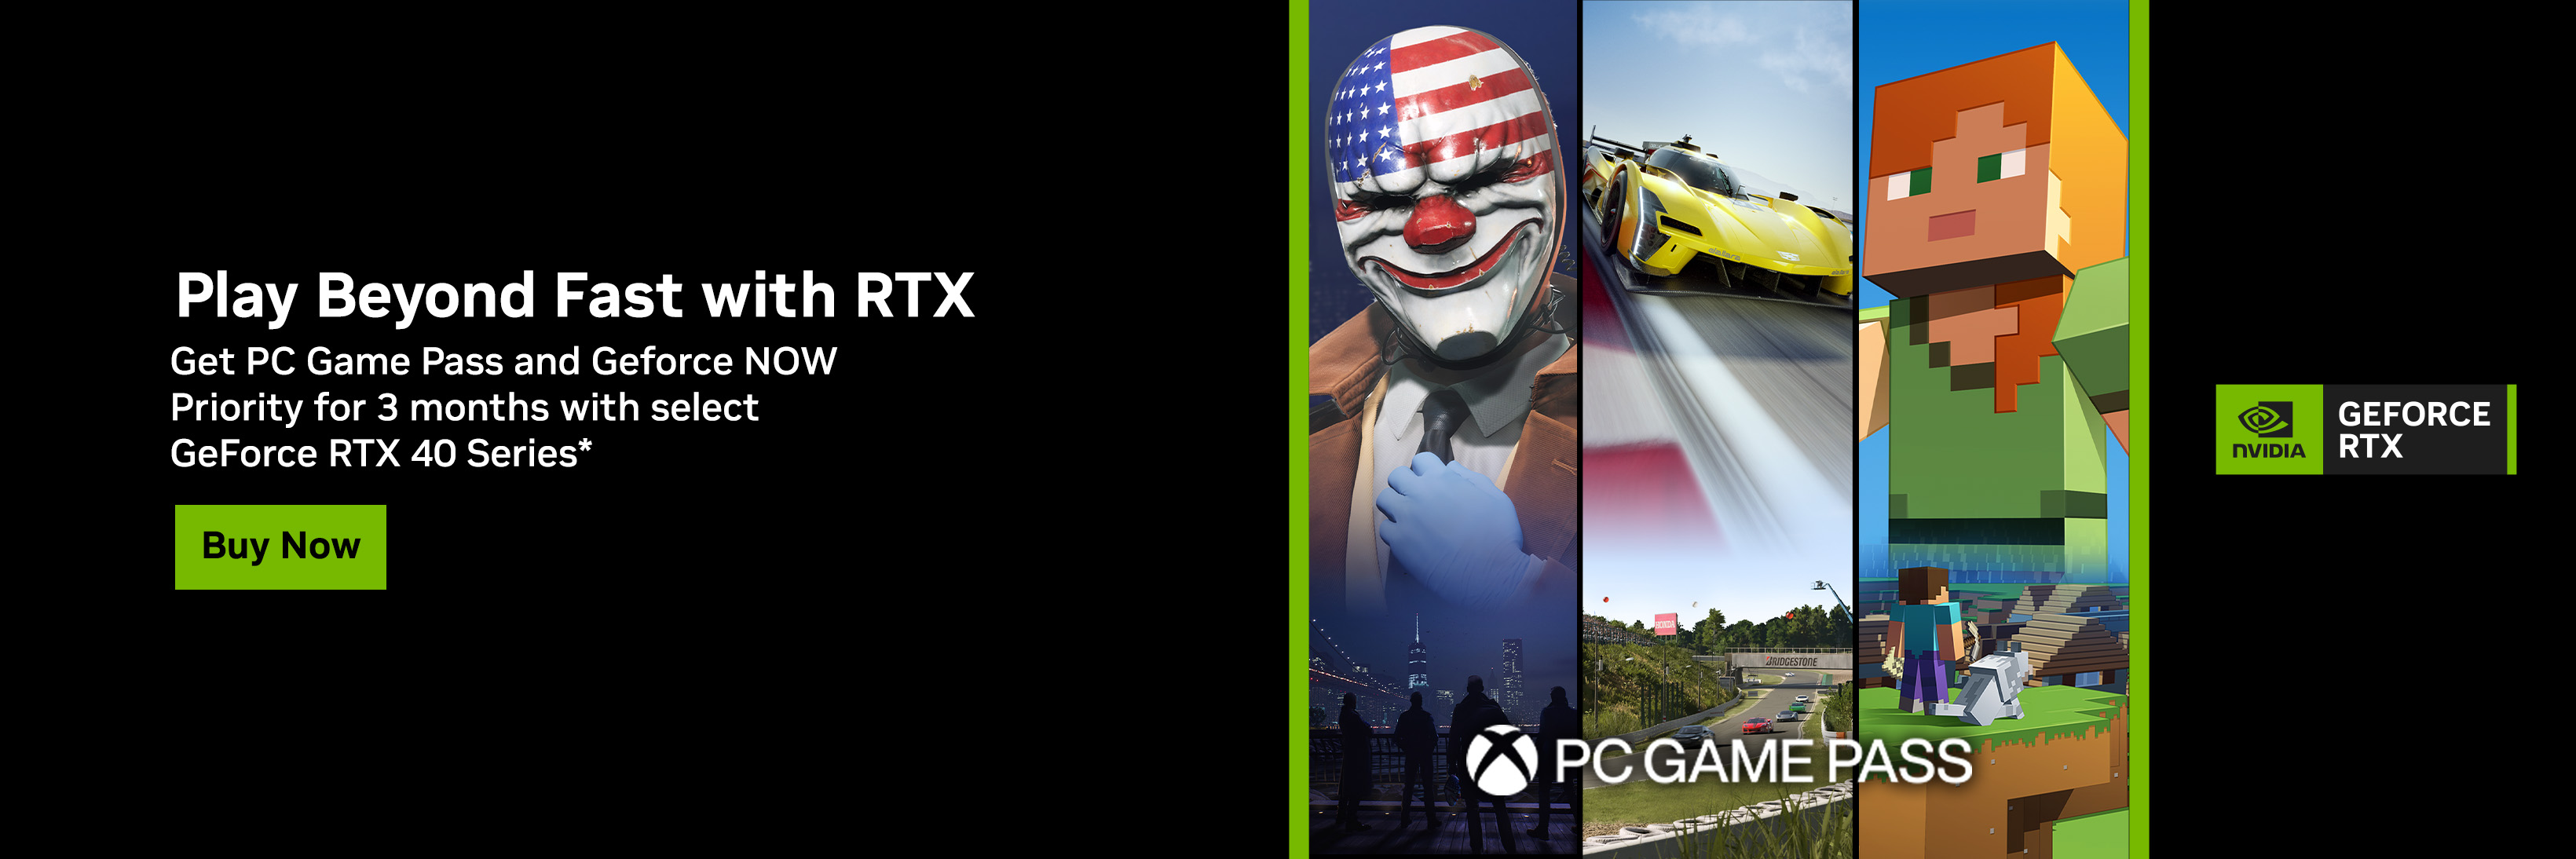 NVIDIA - PC Game Pass and GeForce NOW